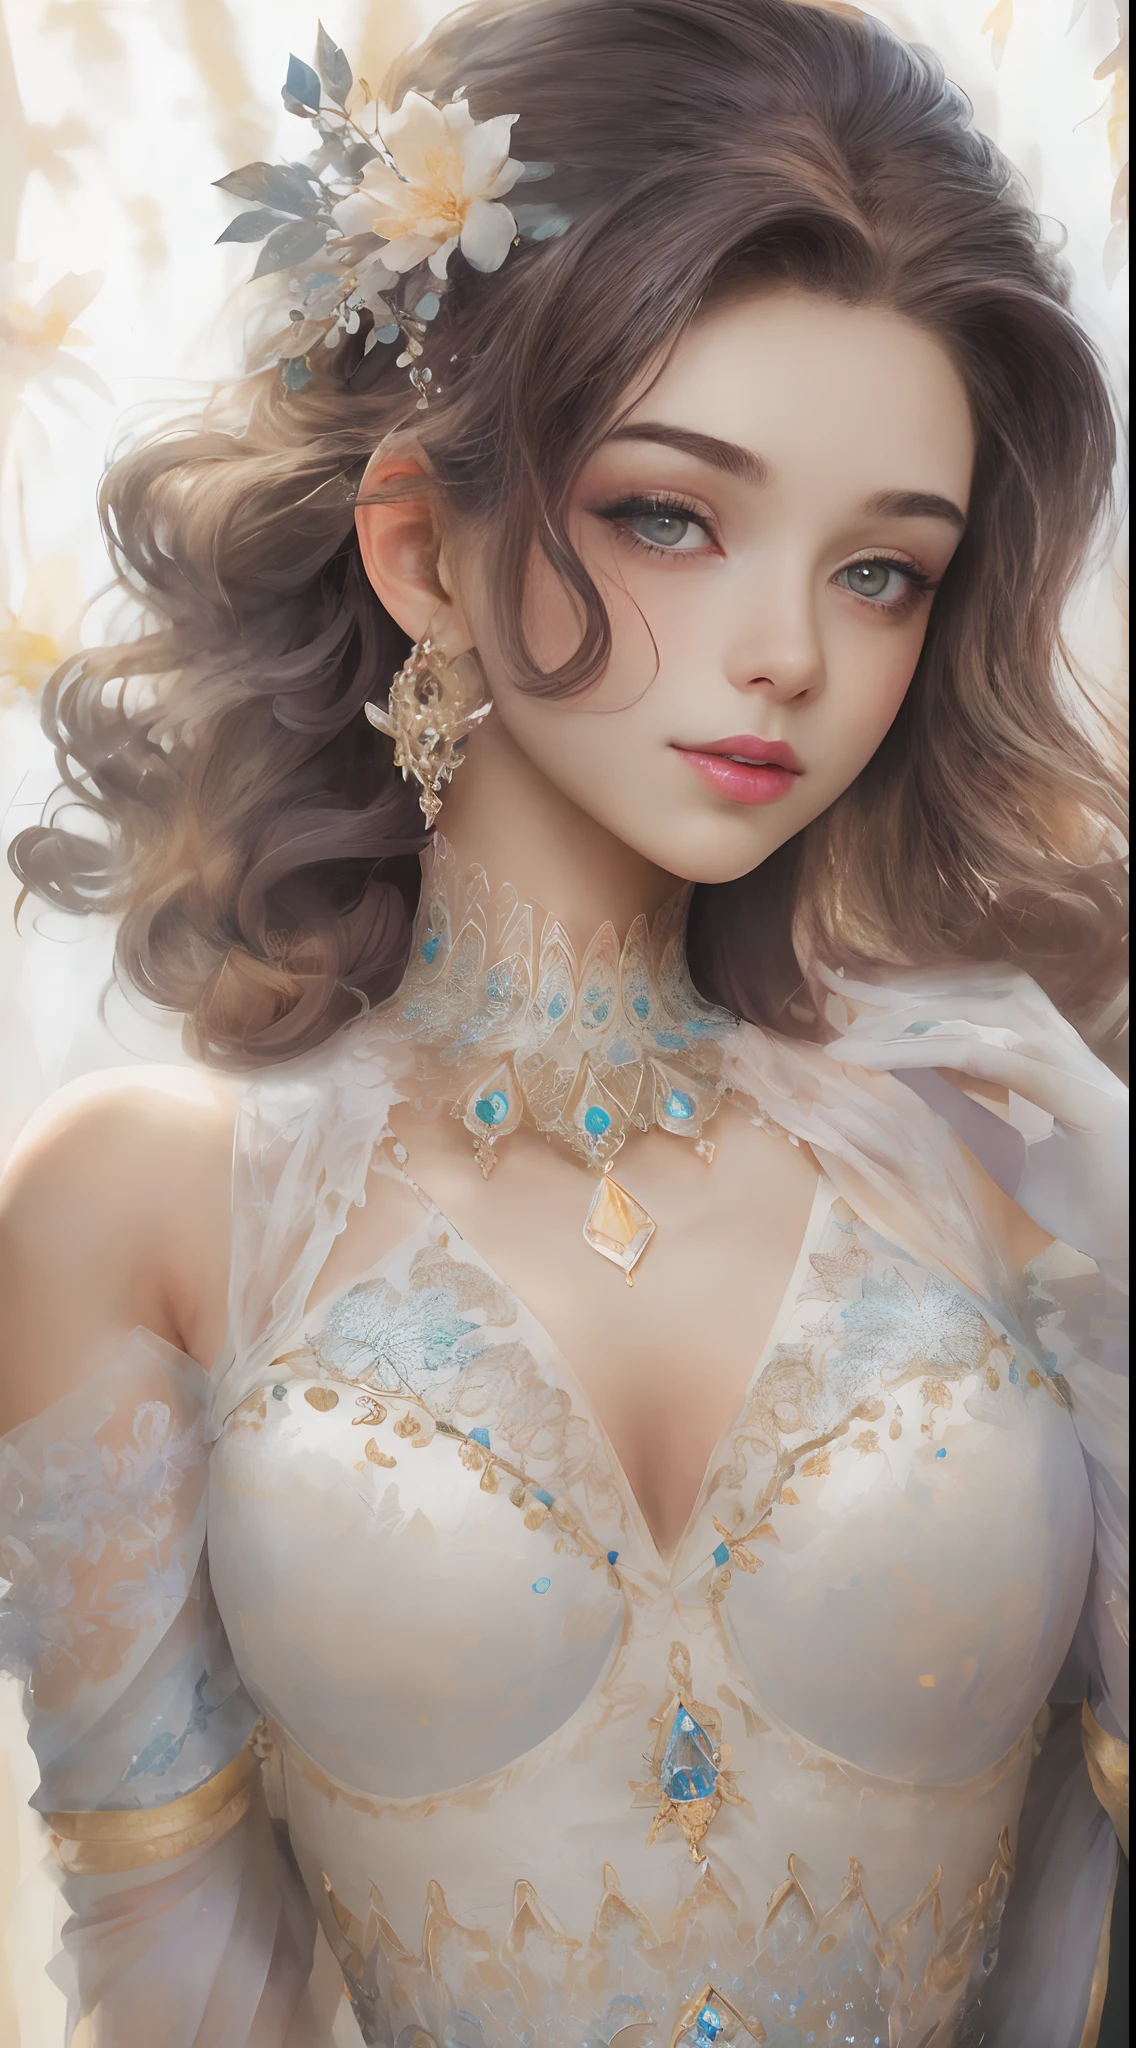 (Best quality, 4K, 8K, A high resolution, Masterpiece:1.2), Ultra-detailed, Realistic portrait of the upper body of an 18 year old aristocratic girl, Exquisite facial features，Clear and shiny eyes，Long curly hair details expressed, The posture is leisurely and natural，Graceful posture, The golden ratio of the head and body，Dreamy atmosphere, expressive brush strokes, mystical ambiance, Artistic interpretation,Delicately coiled hair，Floral filigree crystal diamond jewelry，Ultra-extreme detail，Exquisite details，Fresh aesthetics，Stunning intricate costumes, Fantasy illustration, Subtle colors and tones, mystical aura,The details have been upgraded